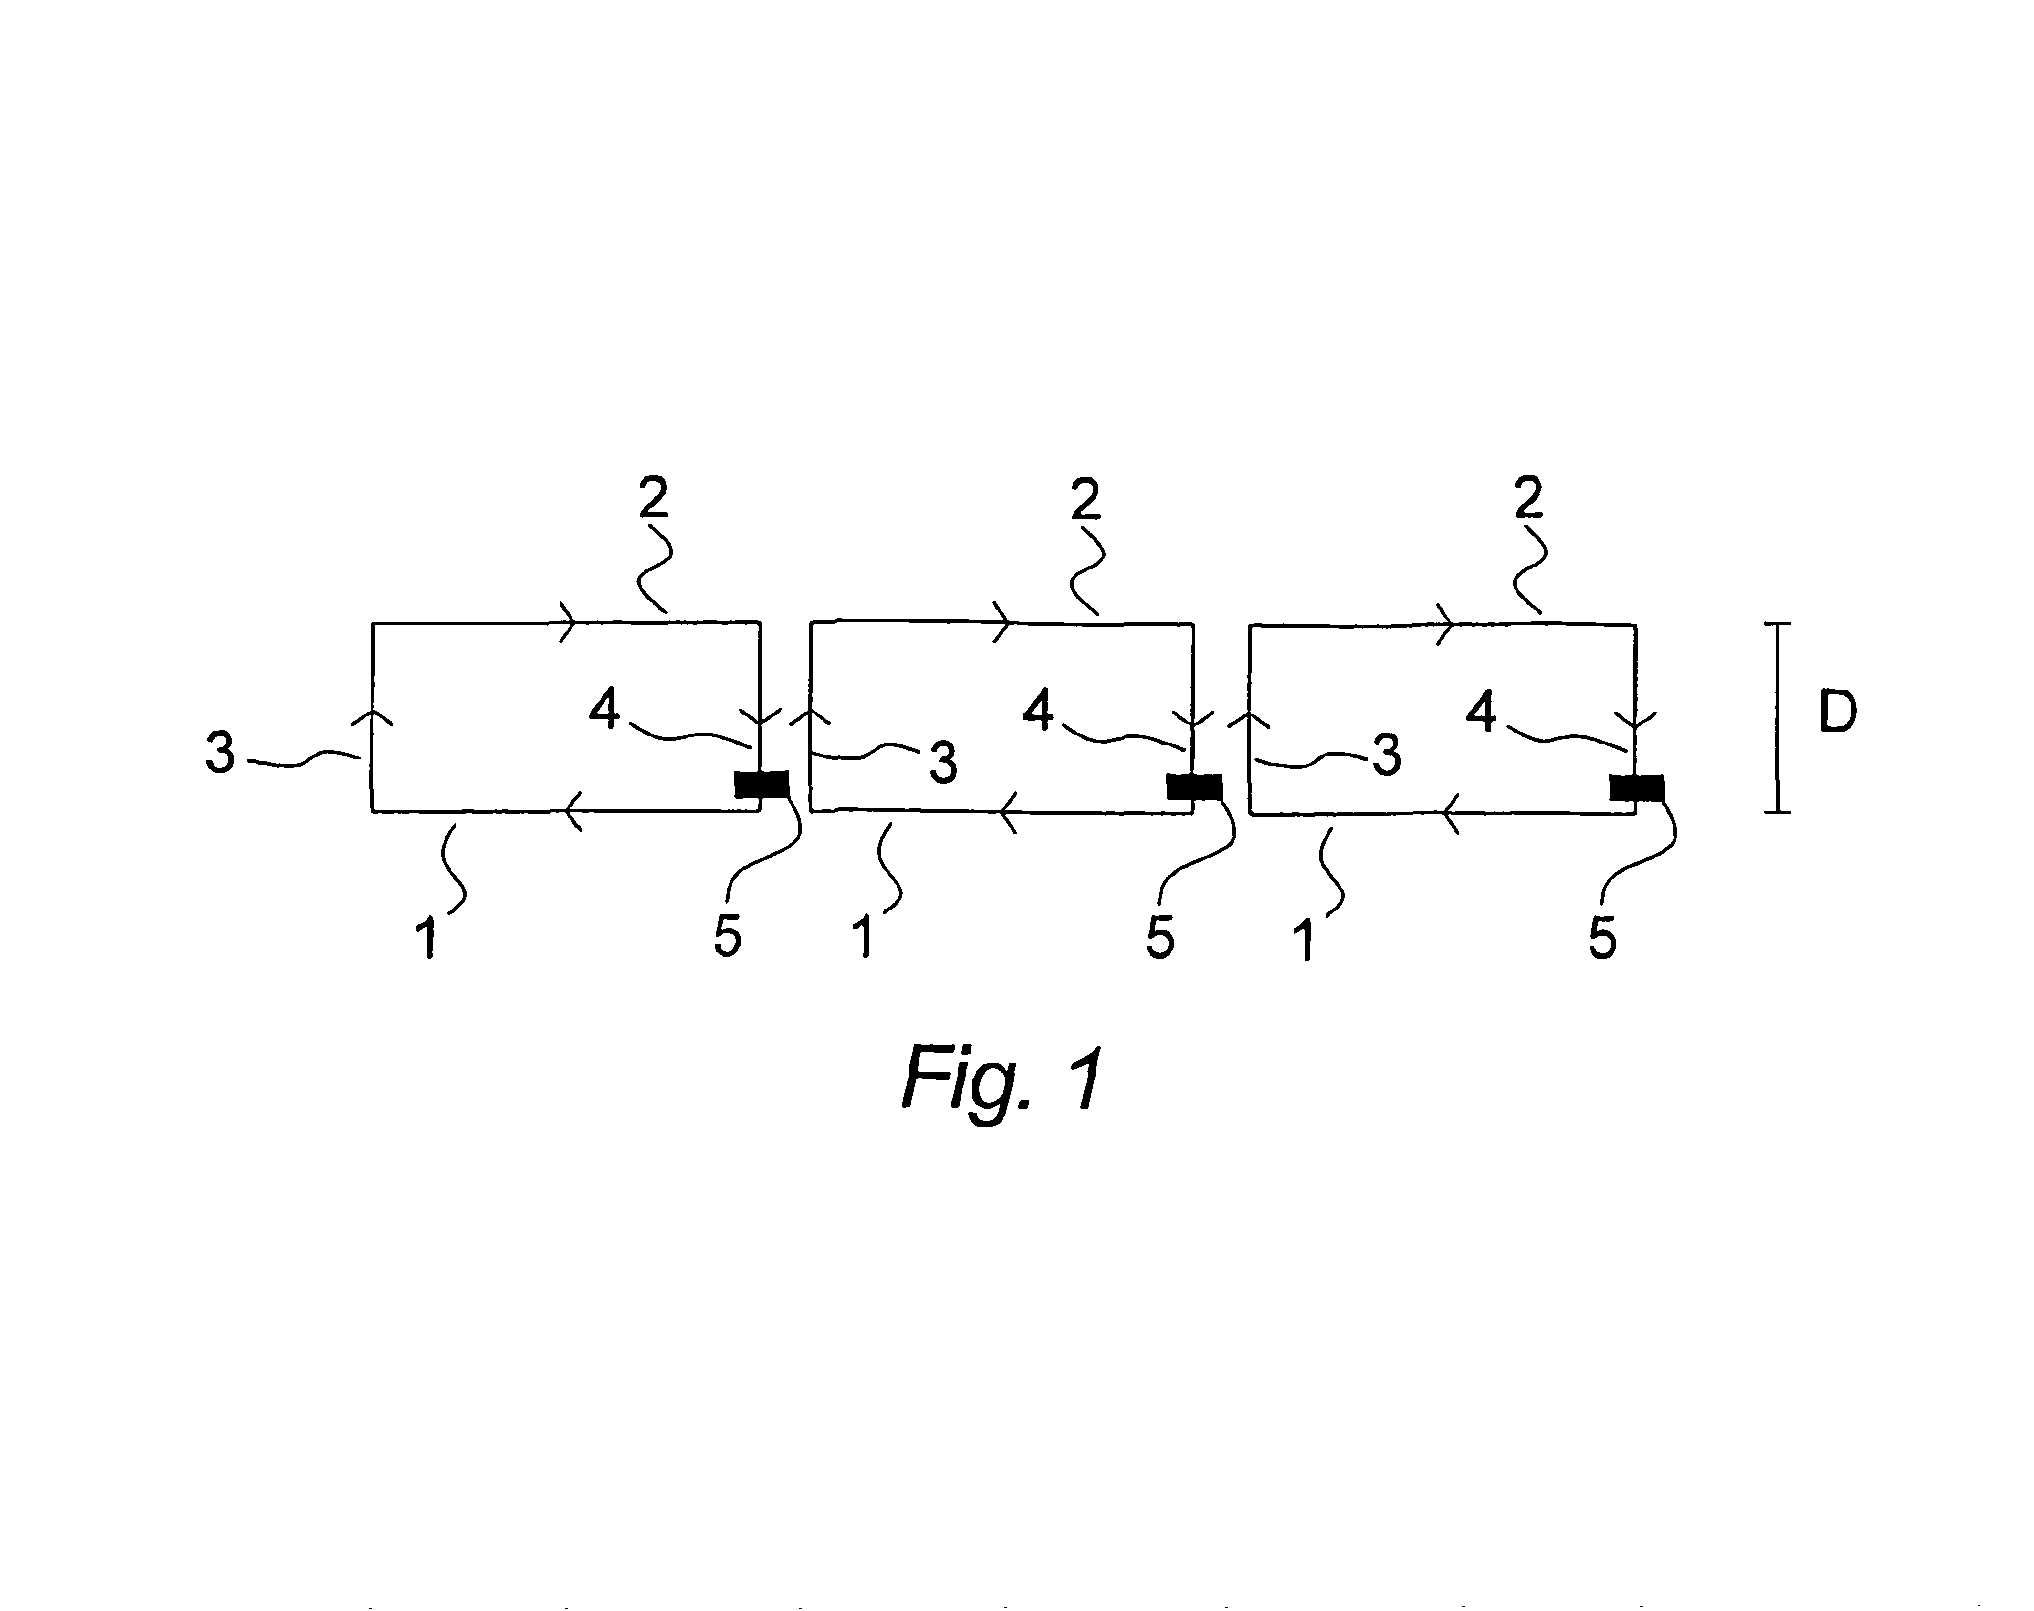 Goal detector for detection of an object passing a goal plane